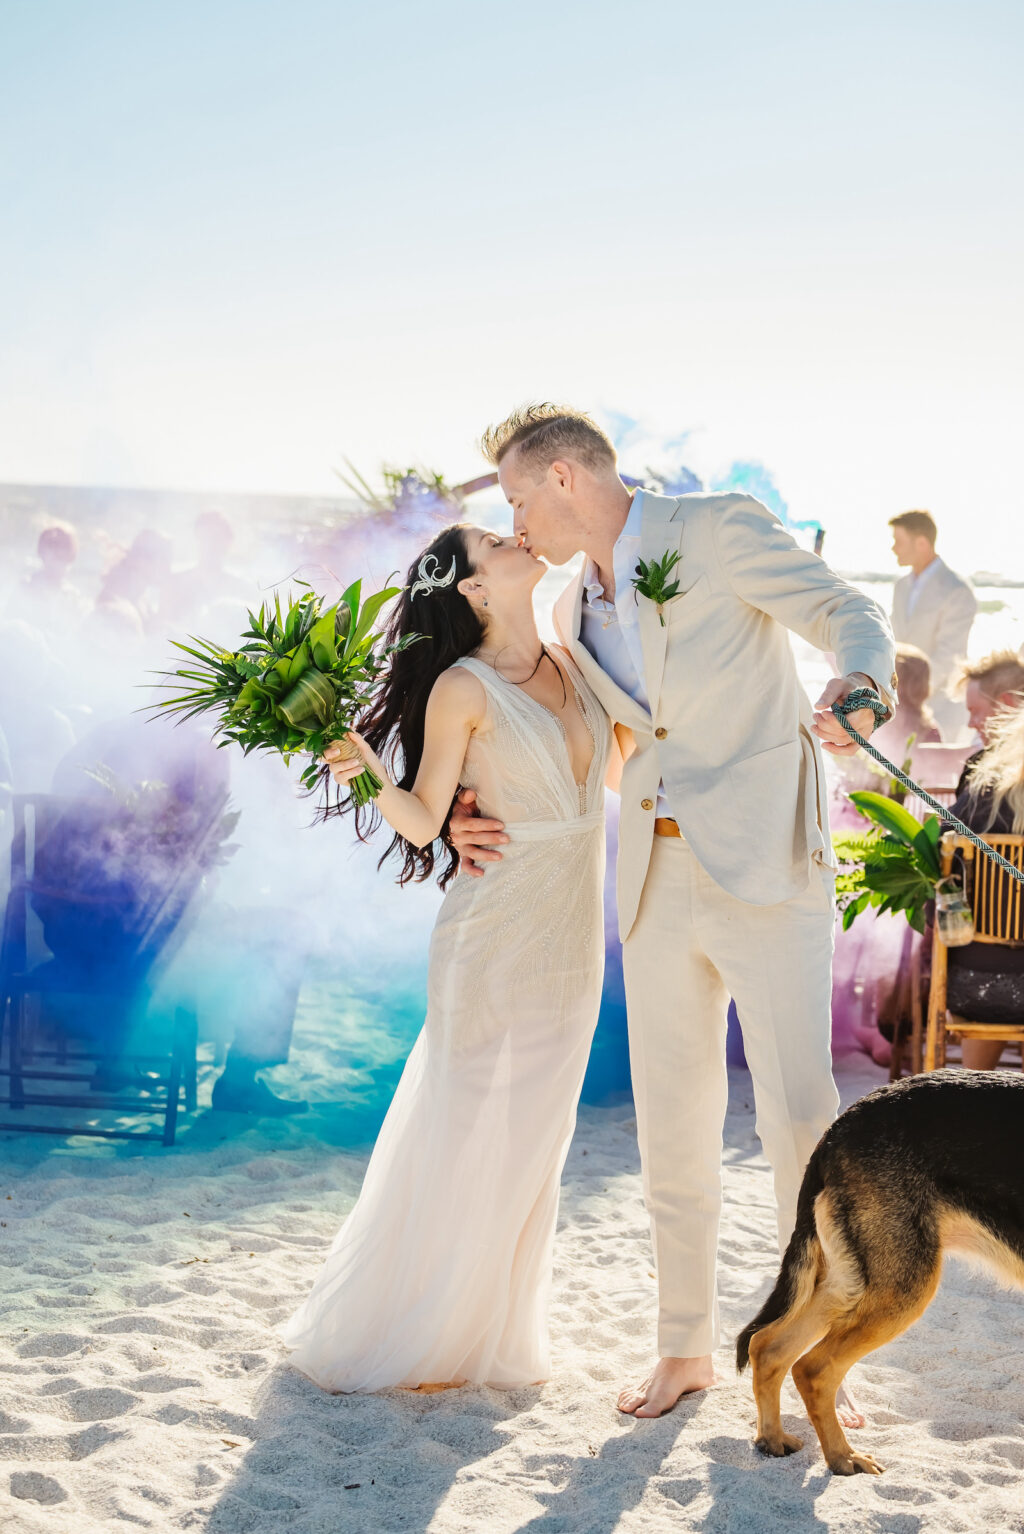 Romantic Florida Bride and Groom Kiss at end of Aisle with Jeweled Toned Smokes Bombs, Bride Wearing Mermaid Style Ines Di Santo Sheer Wedding Dress, Holding Greenery Palm Leaf Bouquet, Groom Wearing Khaki Suit and Barefoot in the sand